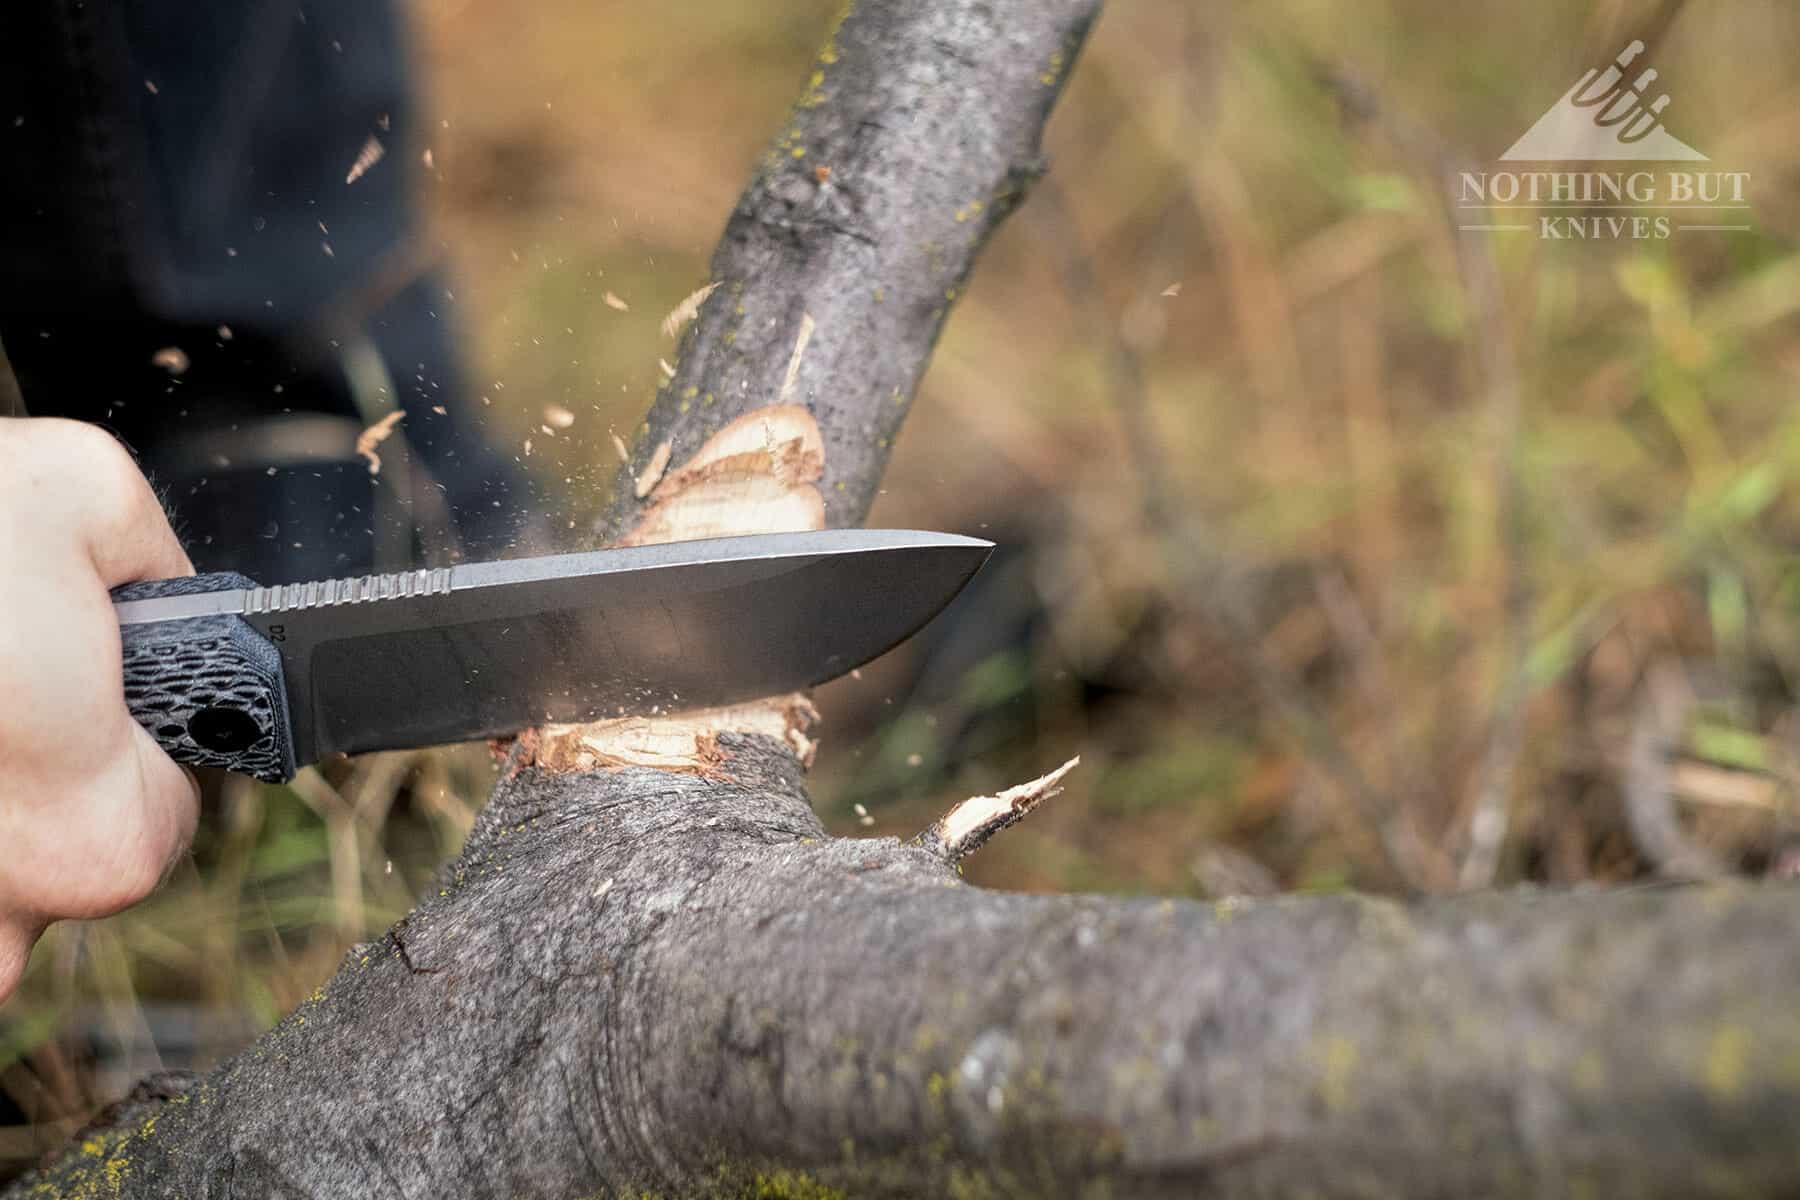 The OTracker X performs well at most tasks needed by a bushcraft knife in actual field use.